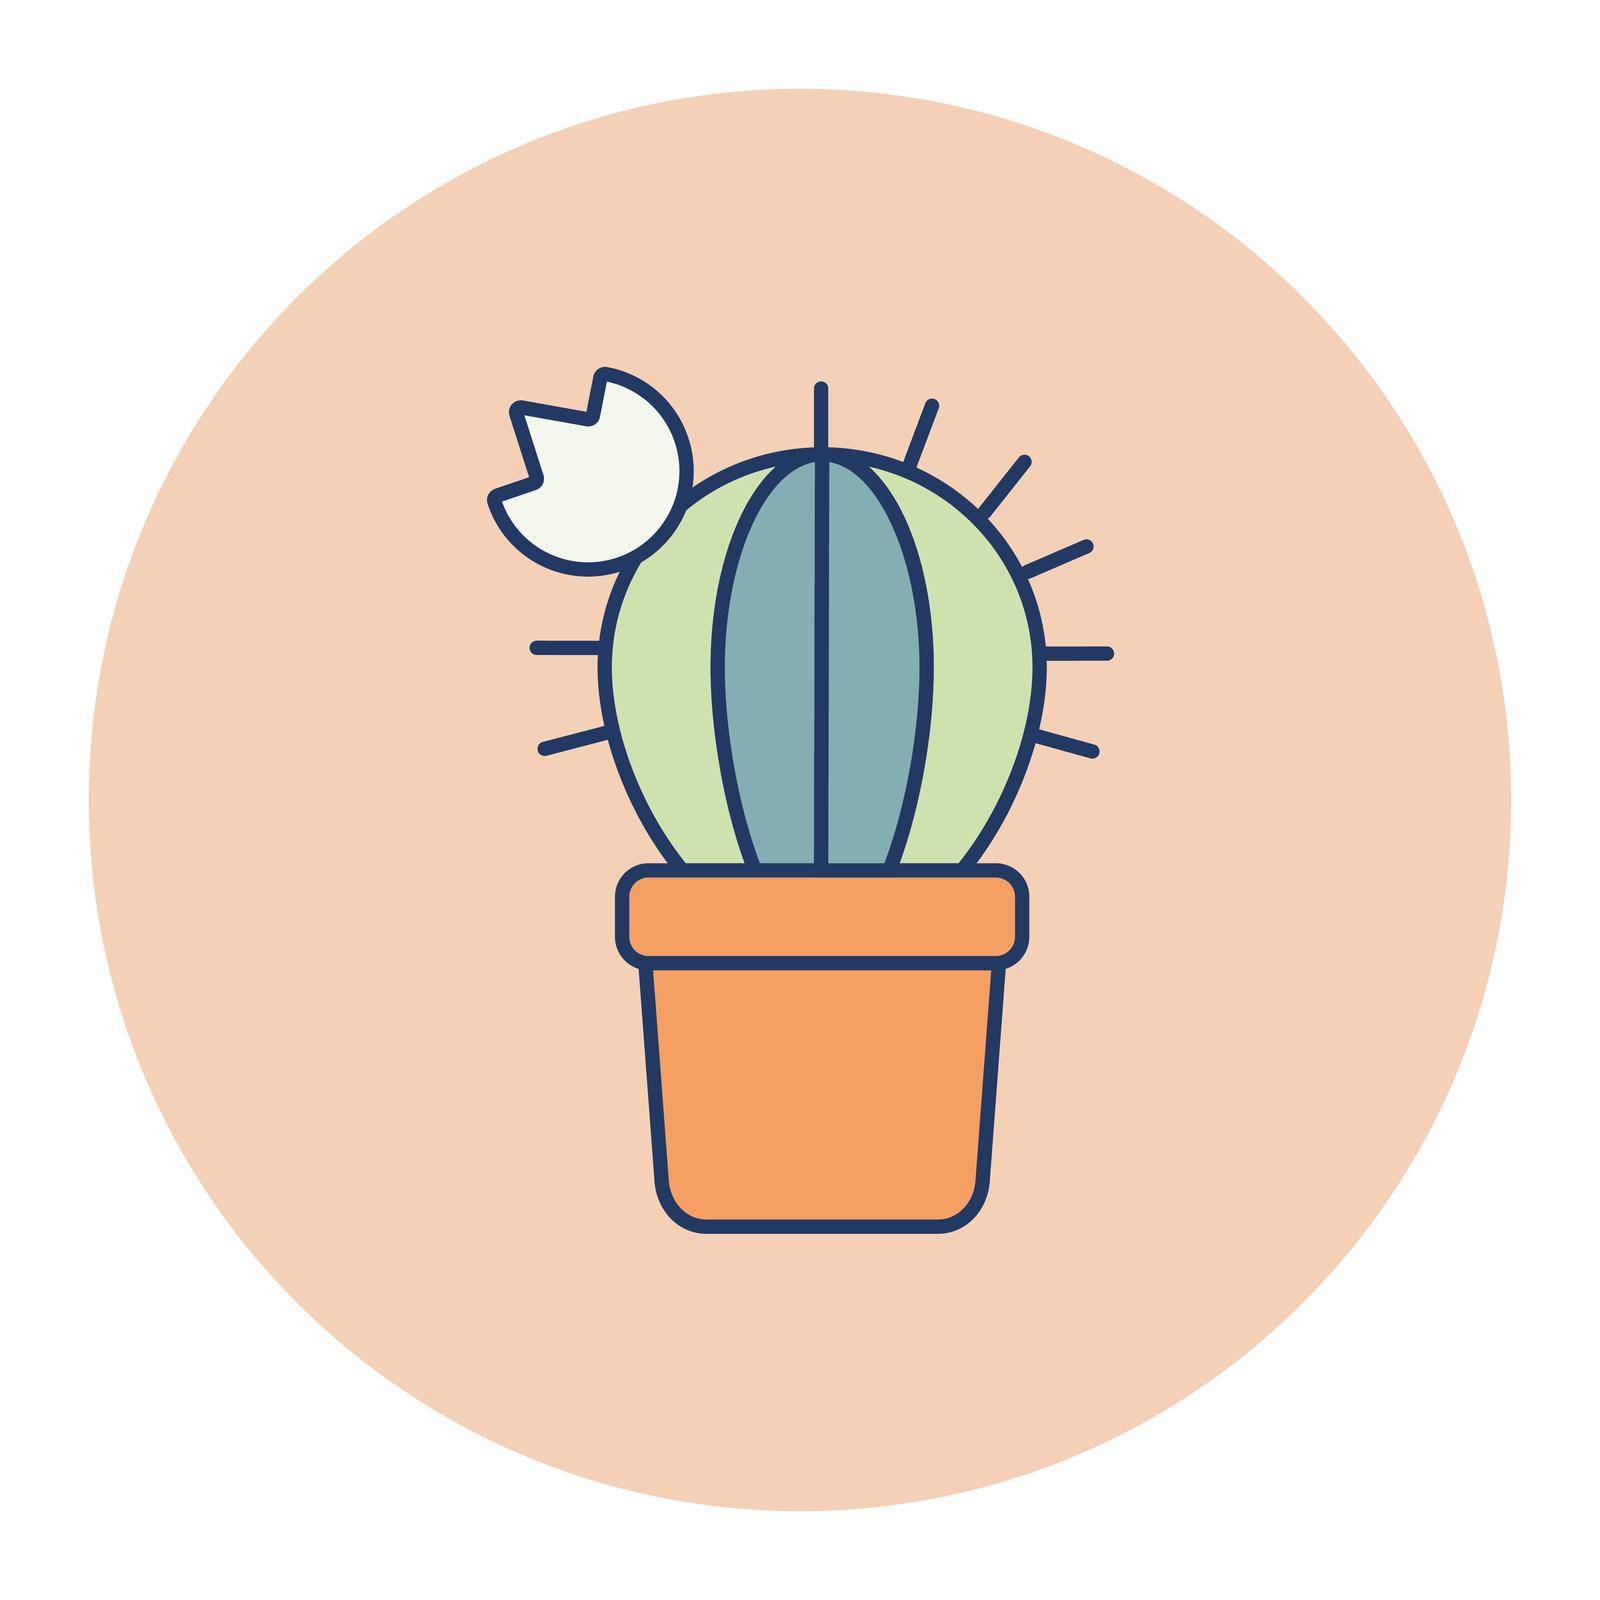 Cactus outline icon. Workspace sign by nosik